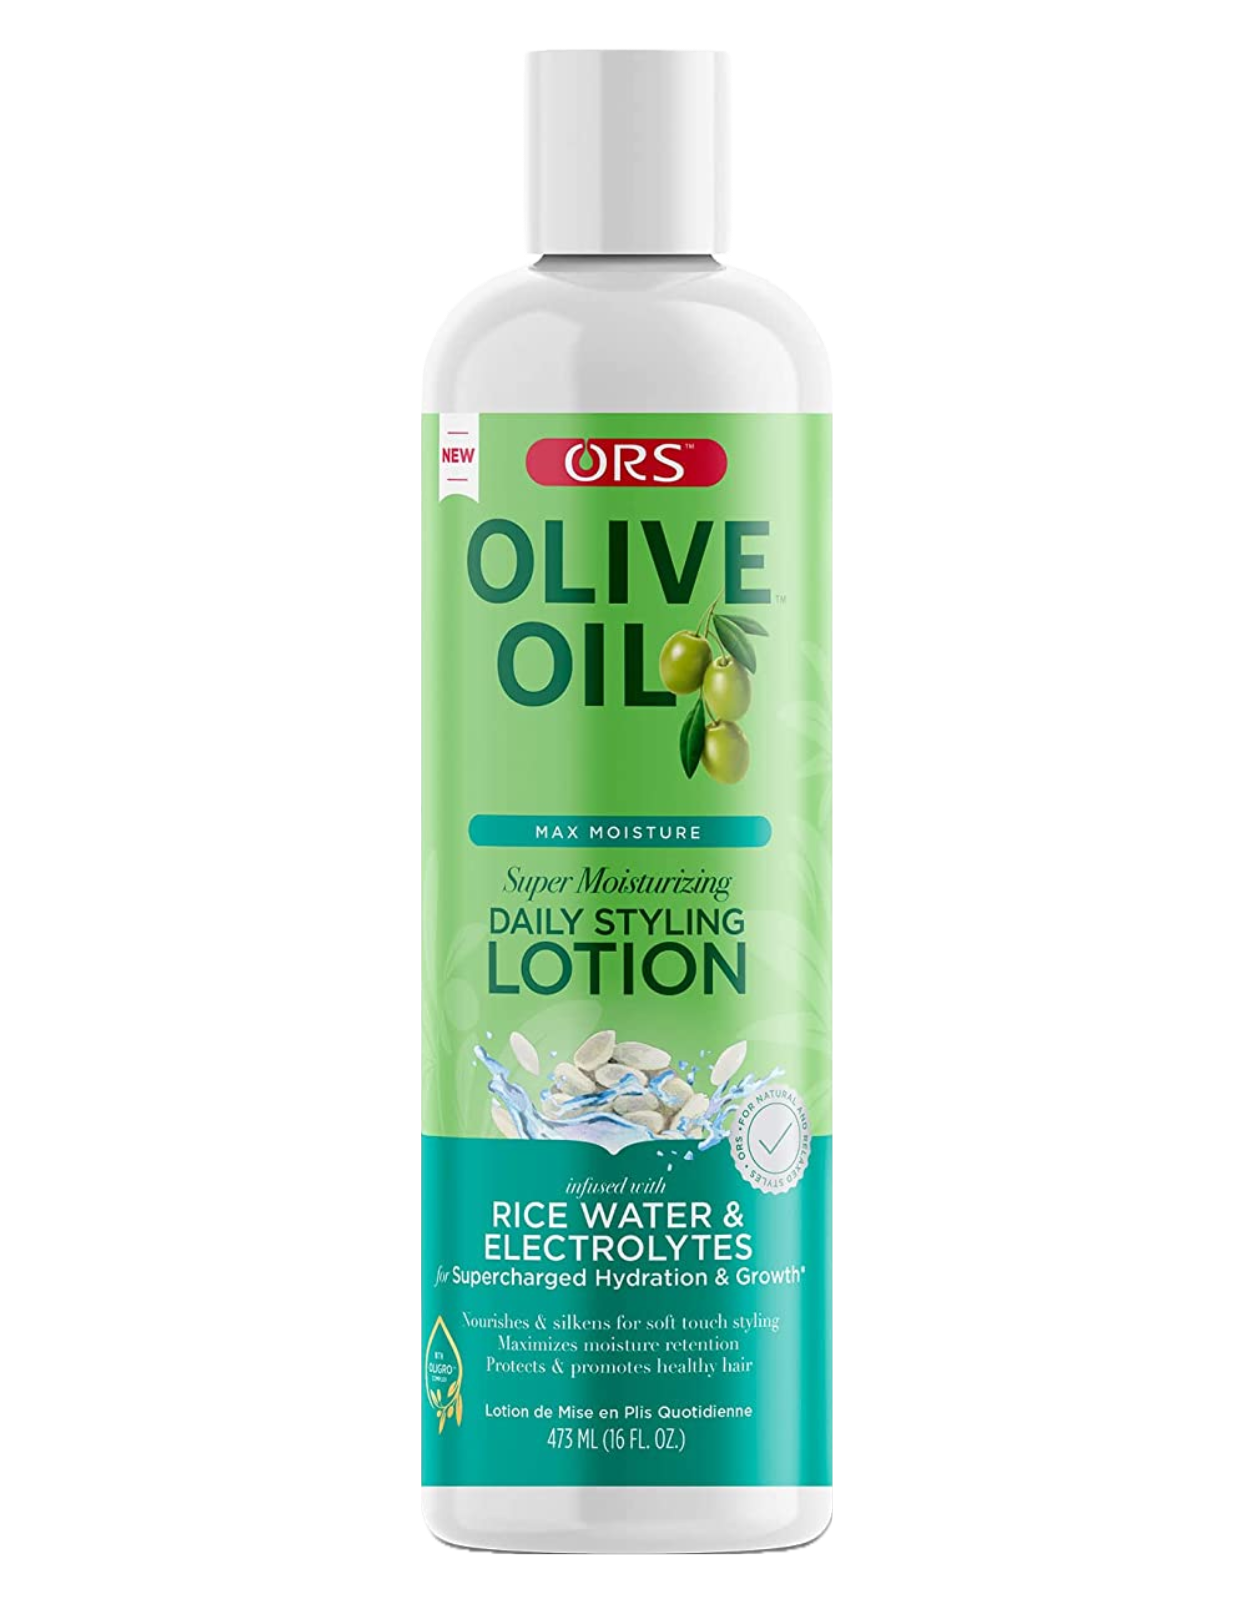 ORS - Olive Oil Max Moisture Super Moisturizing Daily Styling Lotion